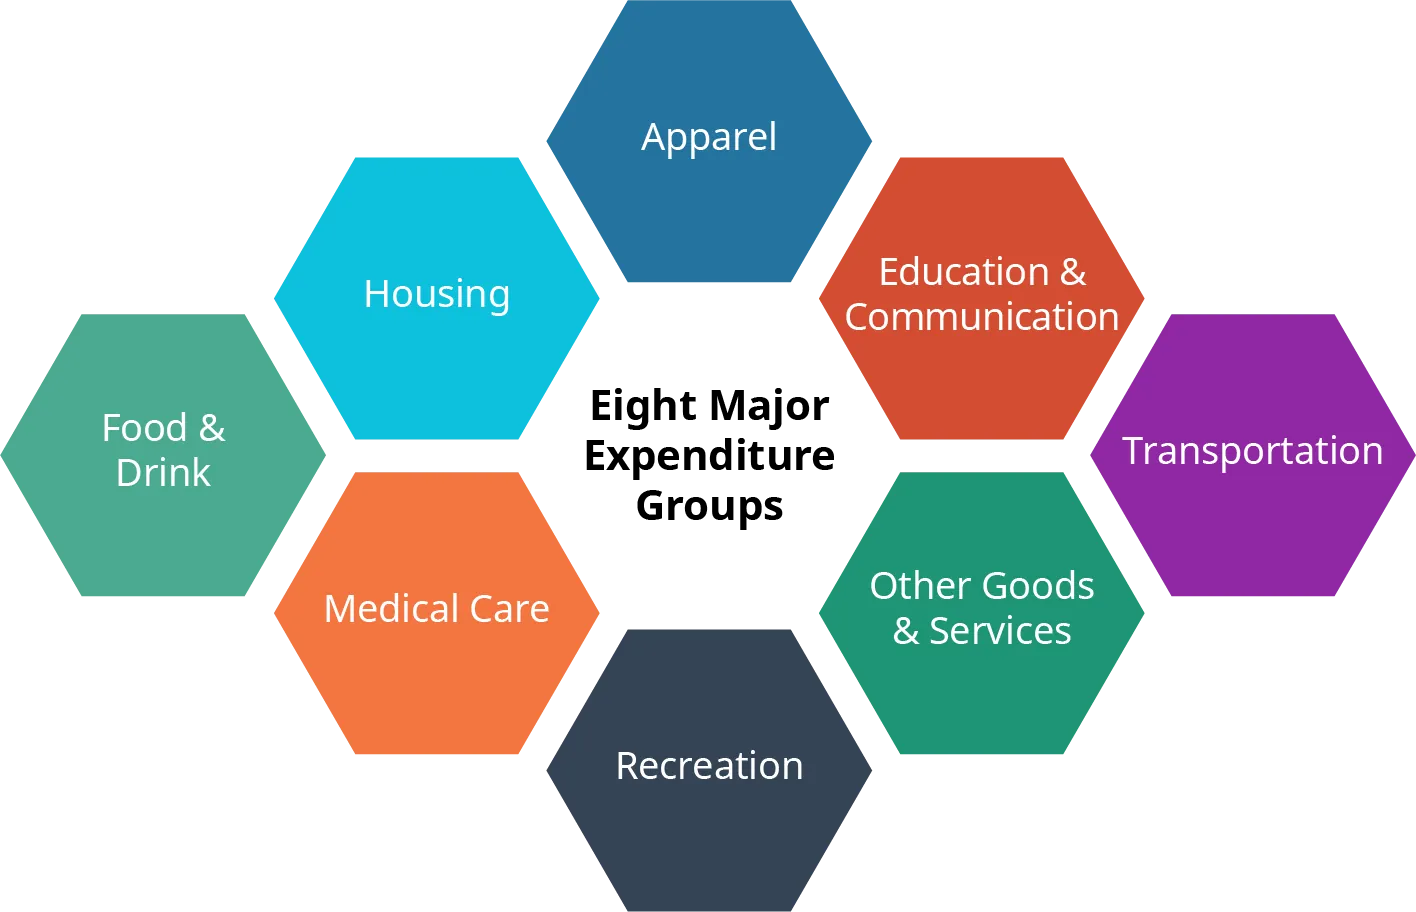 A diagram of the Market Basket Categories of Consumer Price Index. There are eight major expenditure groups: Food and Drink, Housing, Apparel, Education & Communication, Transportation, Other Goods & Services, Recreation, and Medical Care.